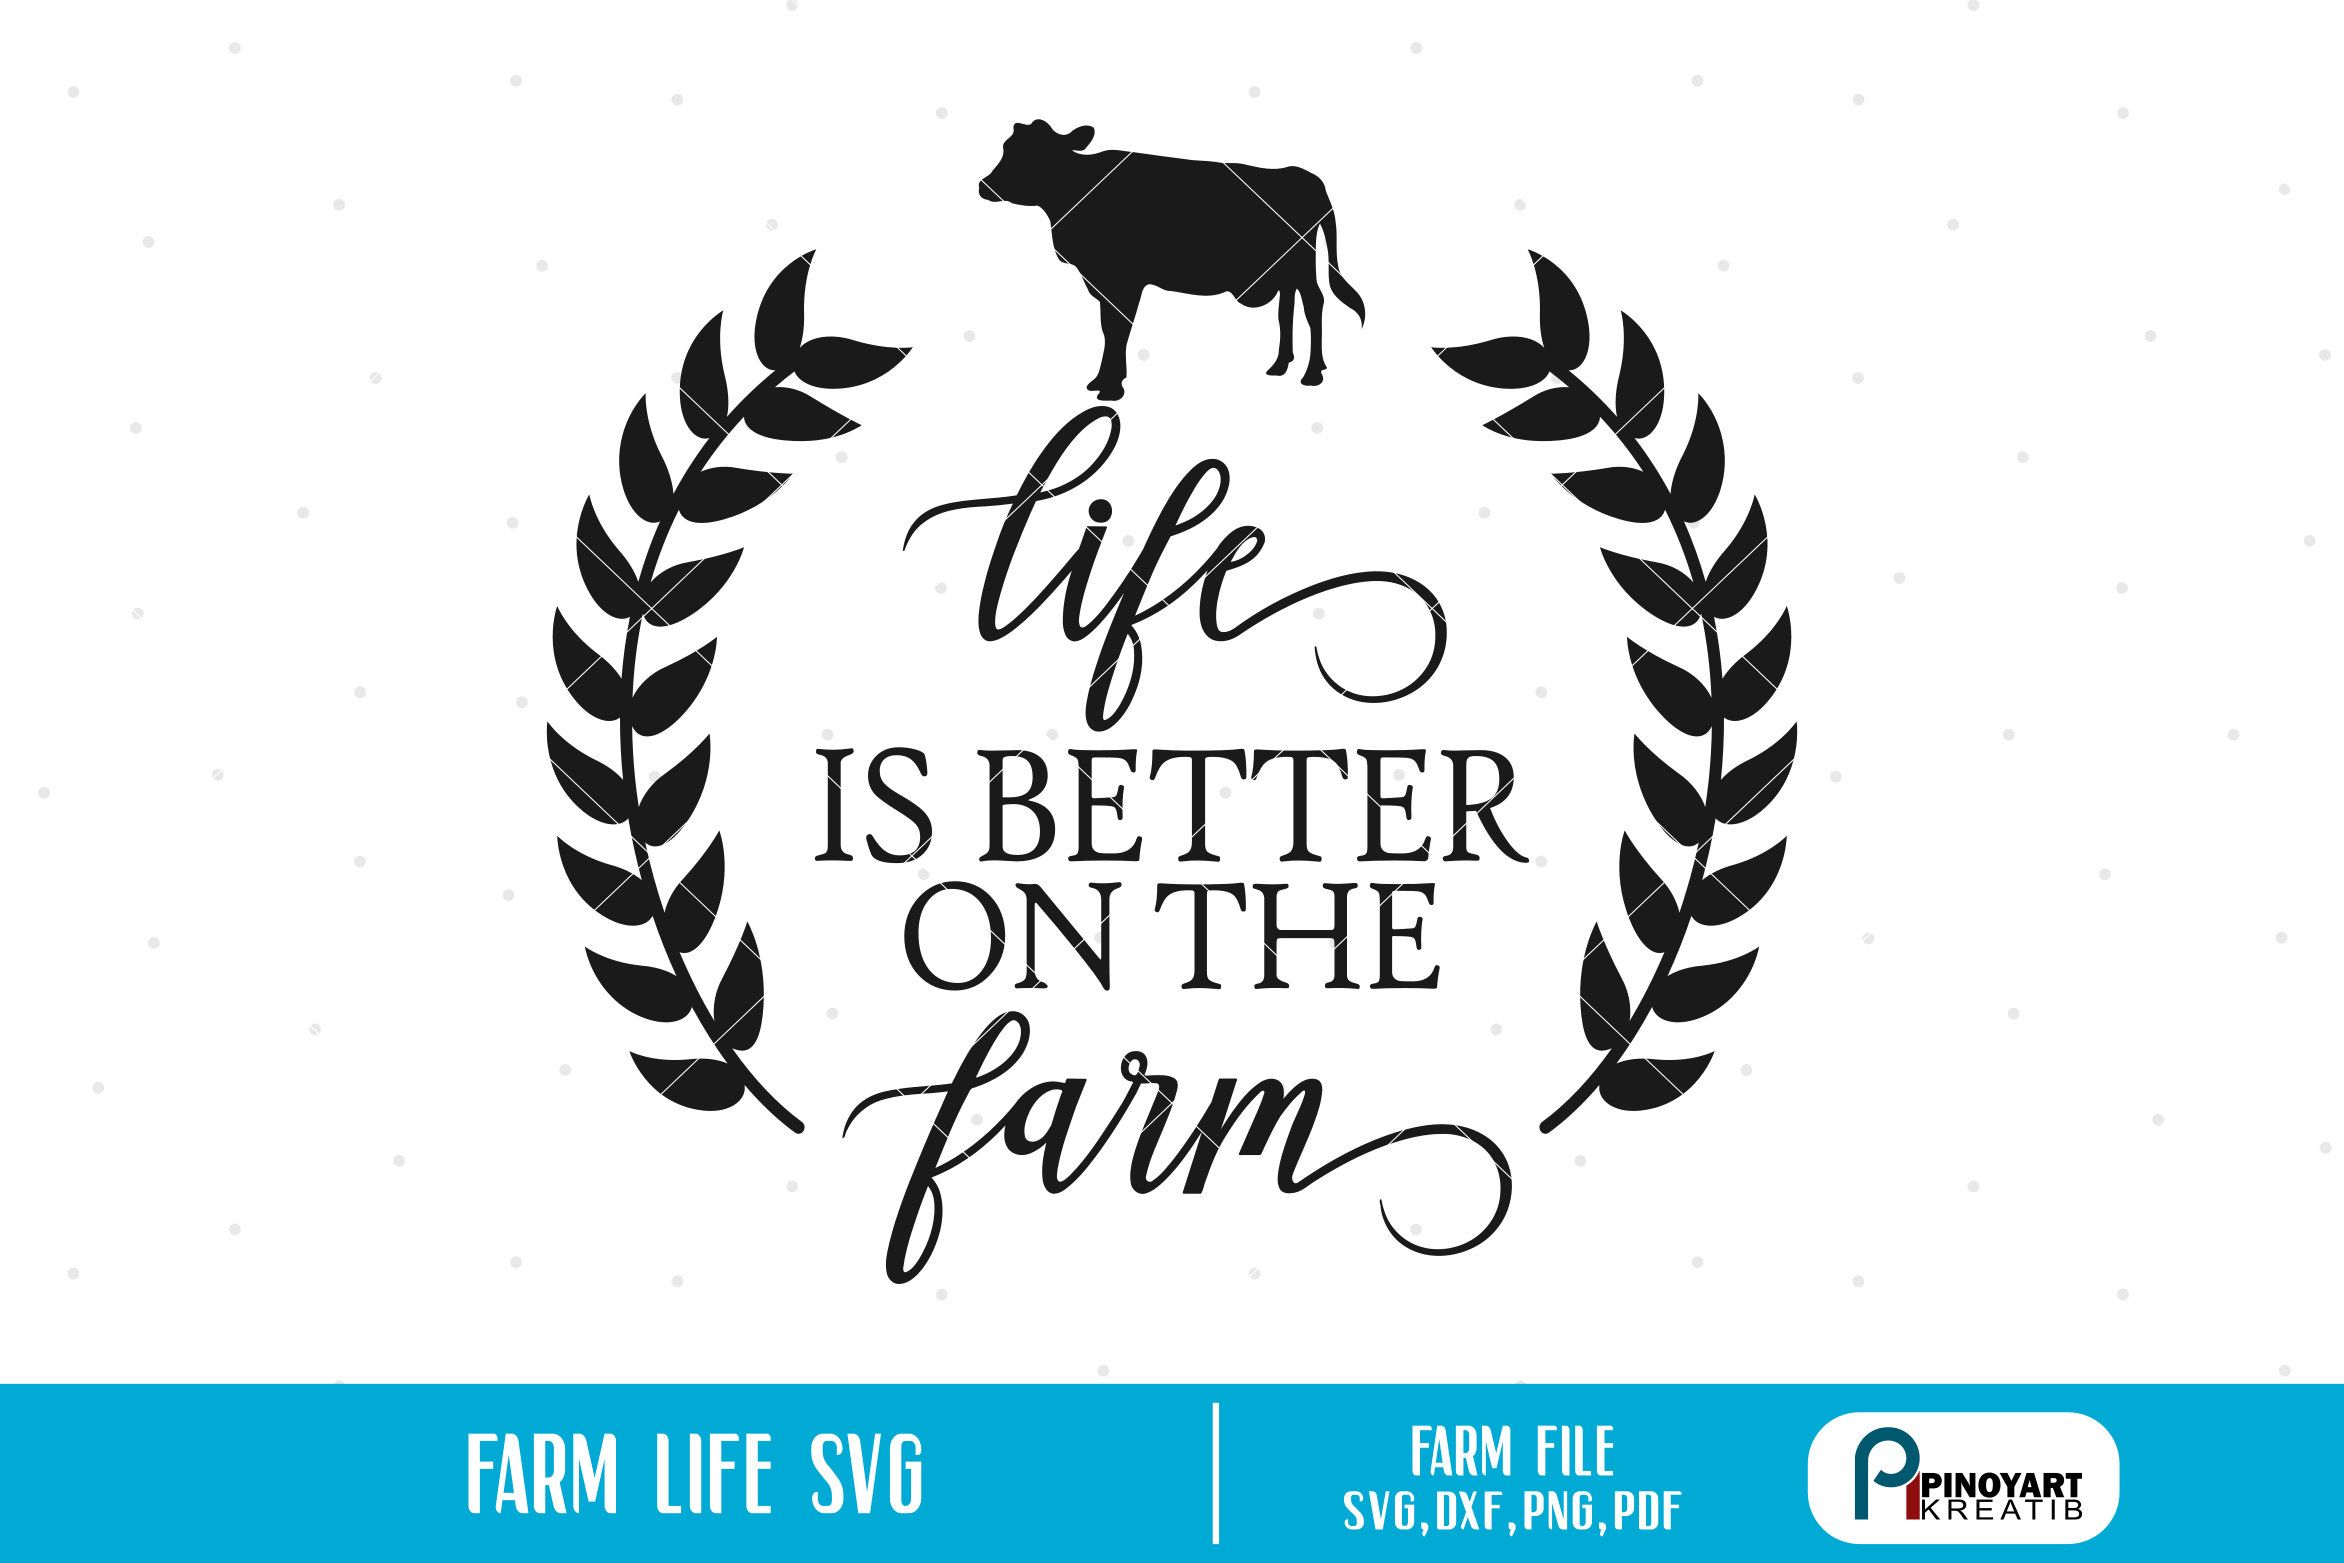 Is better on the. Farming clipart farm life